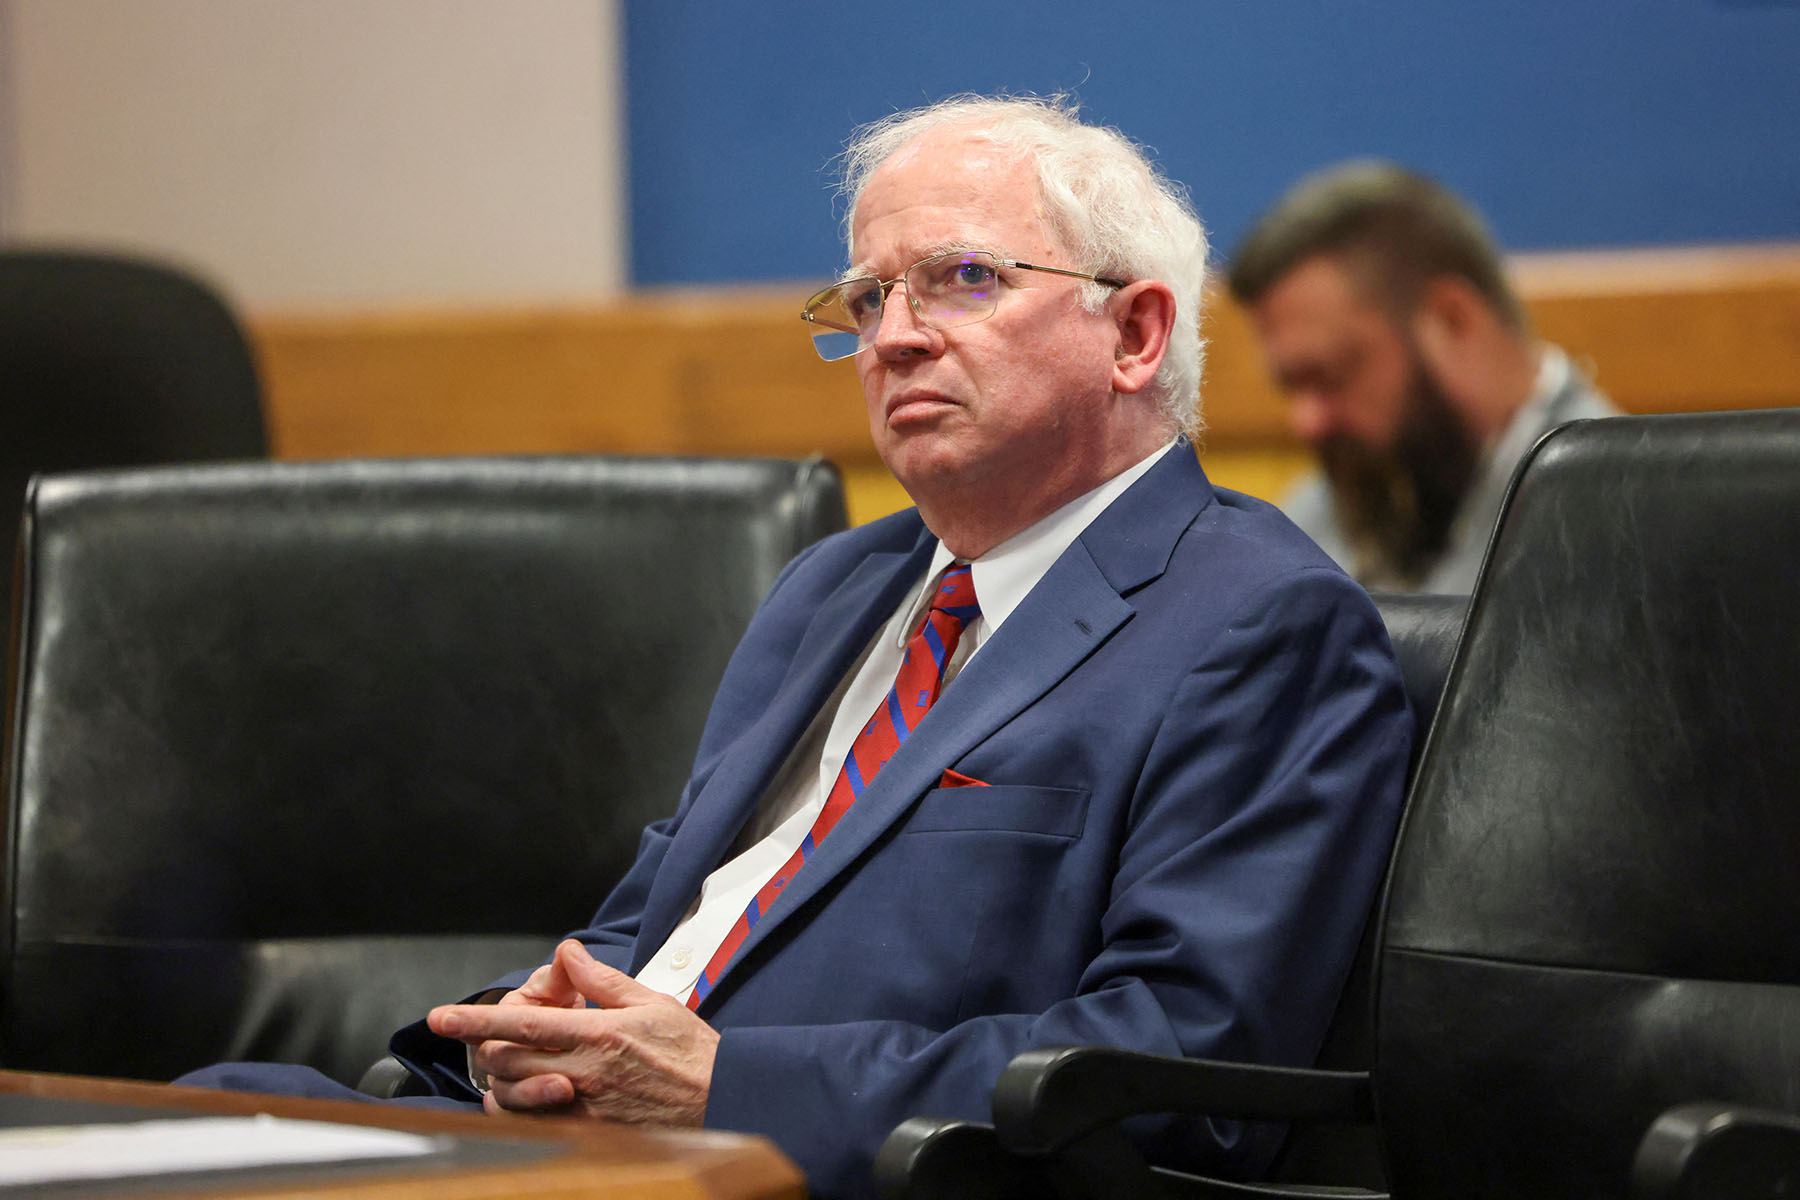 John Eastman sits during Harrison Floyd's hearing at the Superior Court of Fulton County